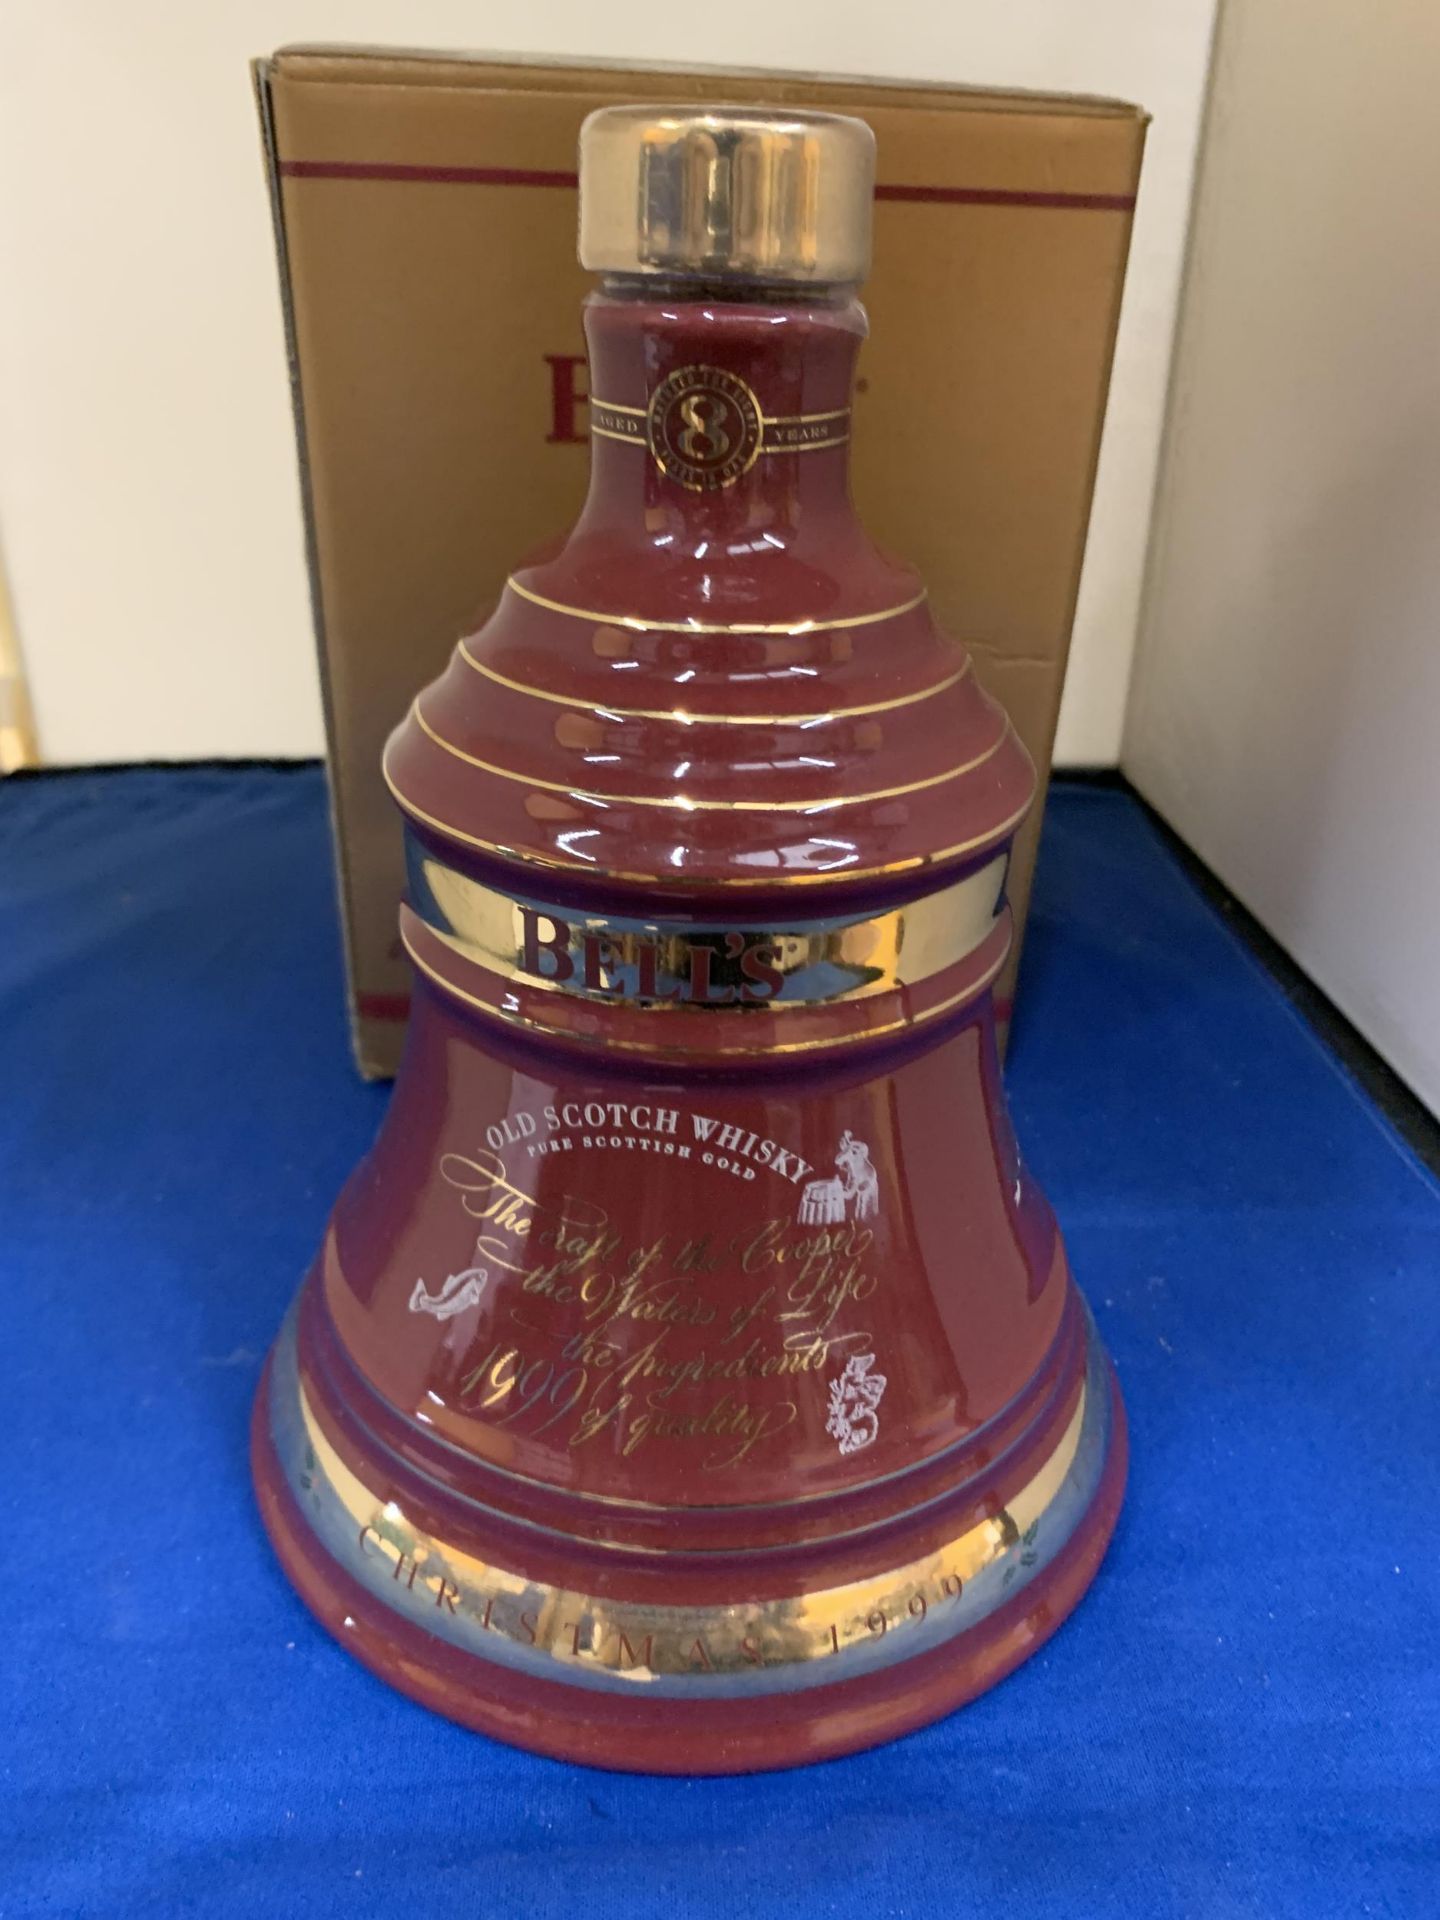 A BOXED 70CL BOTTLE - BELLS LIMITED EDITION CHRISTMAS 1999 OLD SCOTCH WHISKY DECANTER - Image 2 of 3